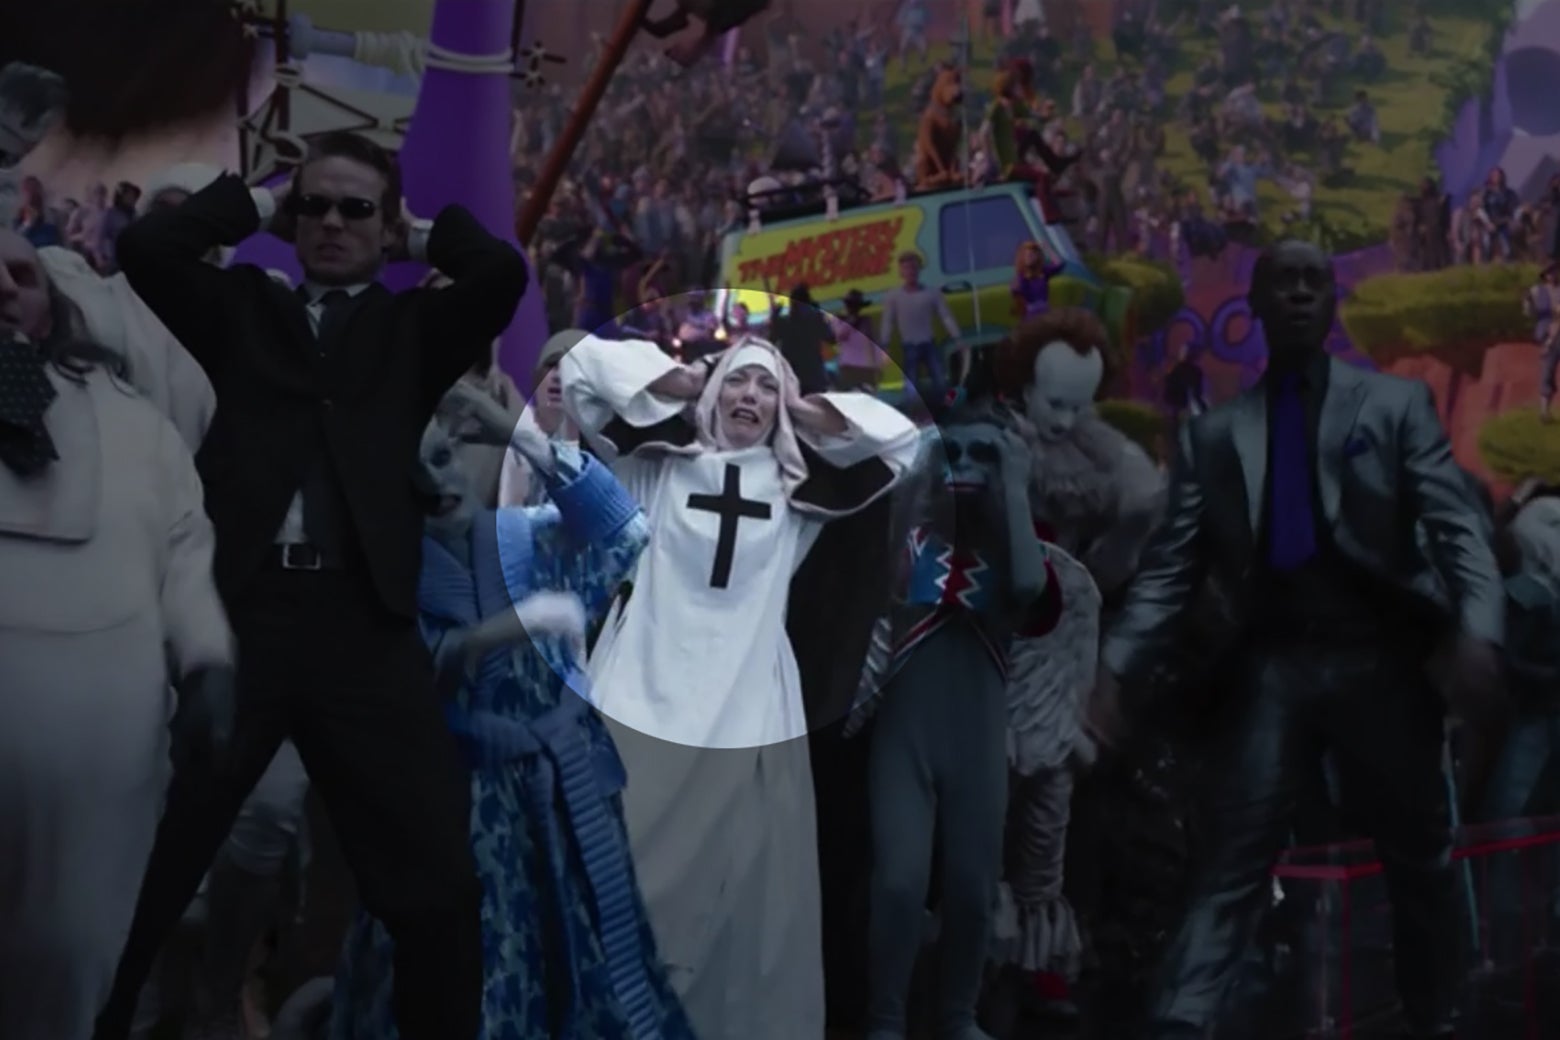 A shot of a cheering crowd from Space Jam: A New Legacy. One of the fans is dressed in a stylized nun's habit with a distinctive black cross on the breast.